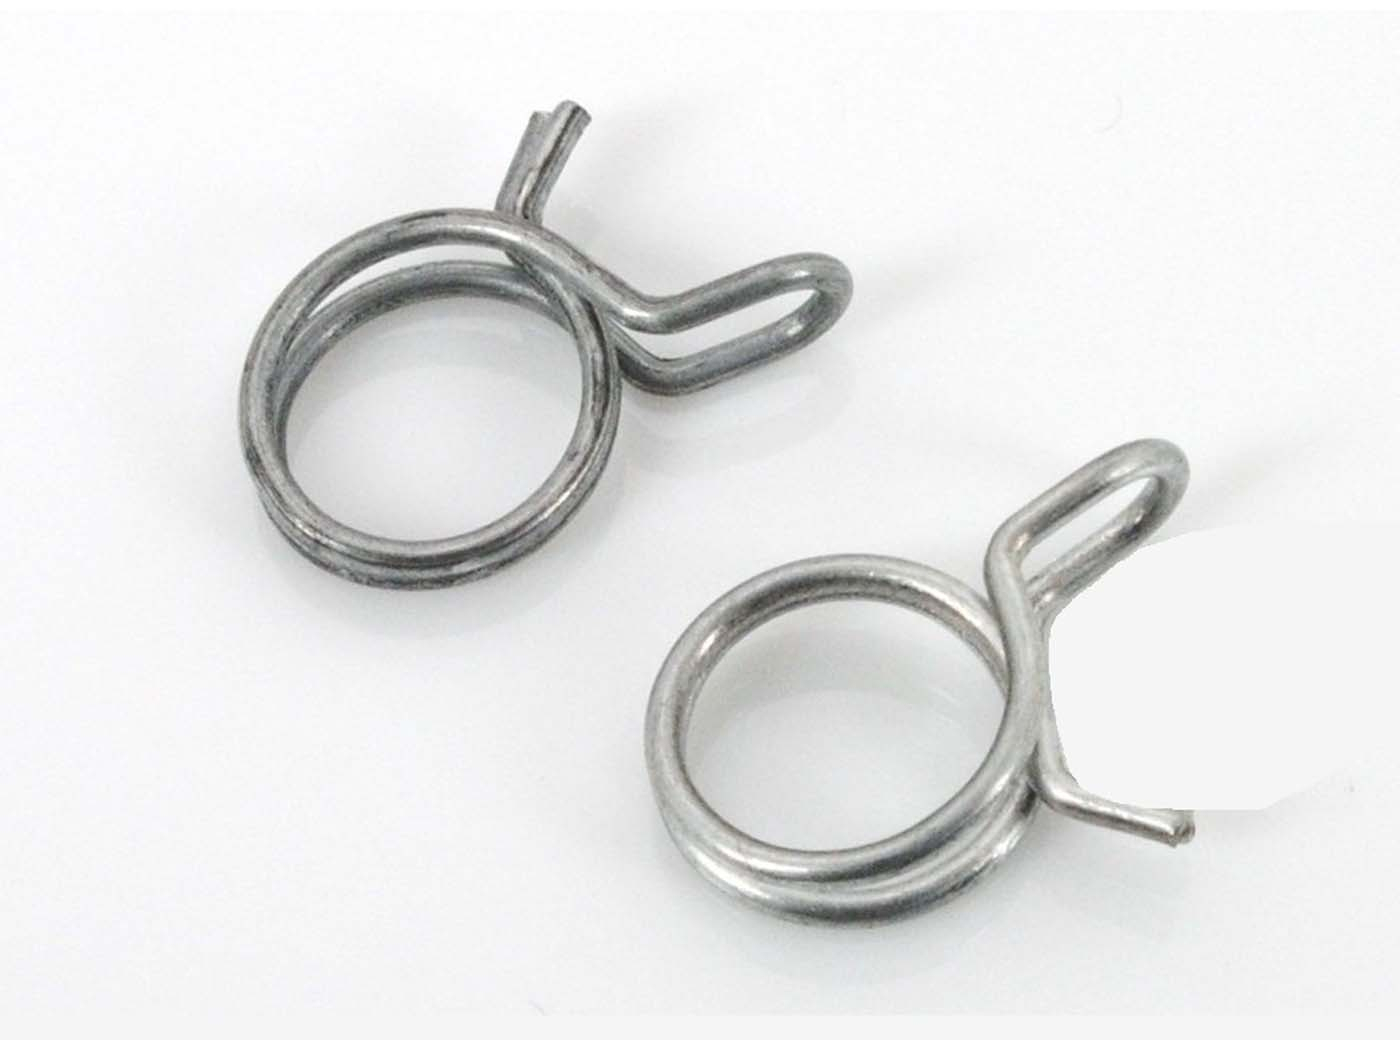 Fuel Hose Clamp Set 7-9mm For Moped Moped Mokick